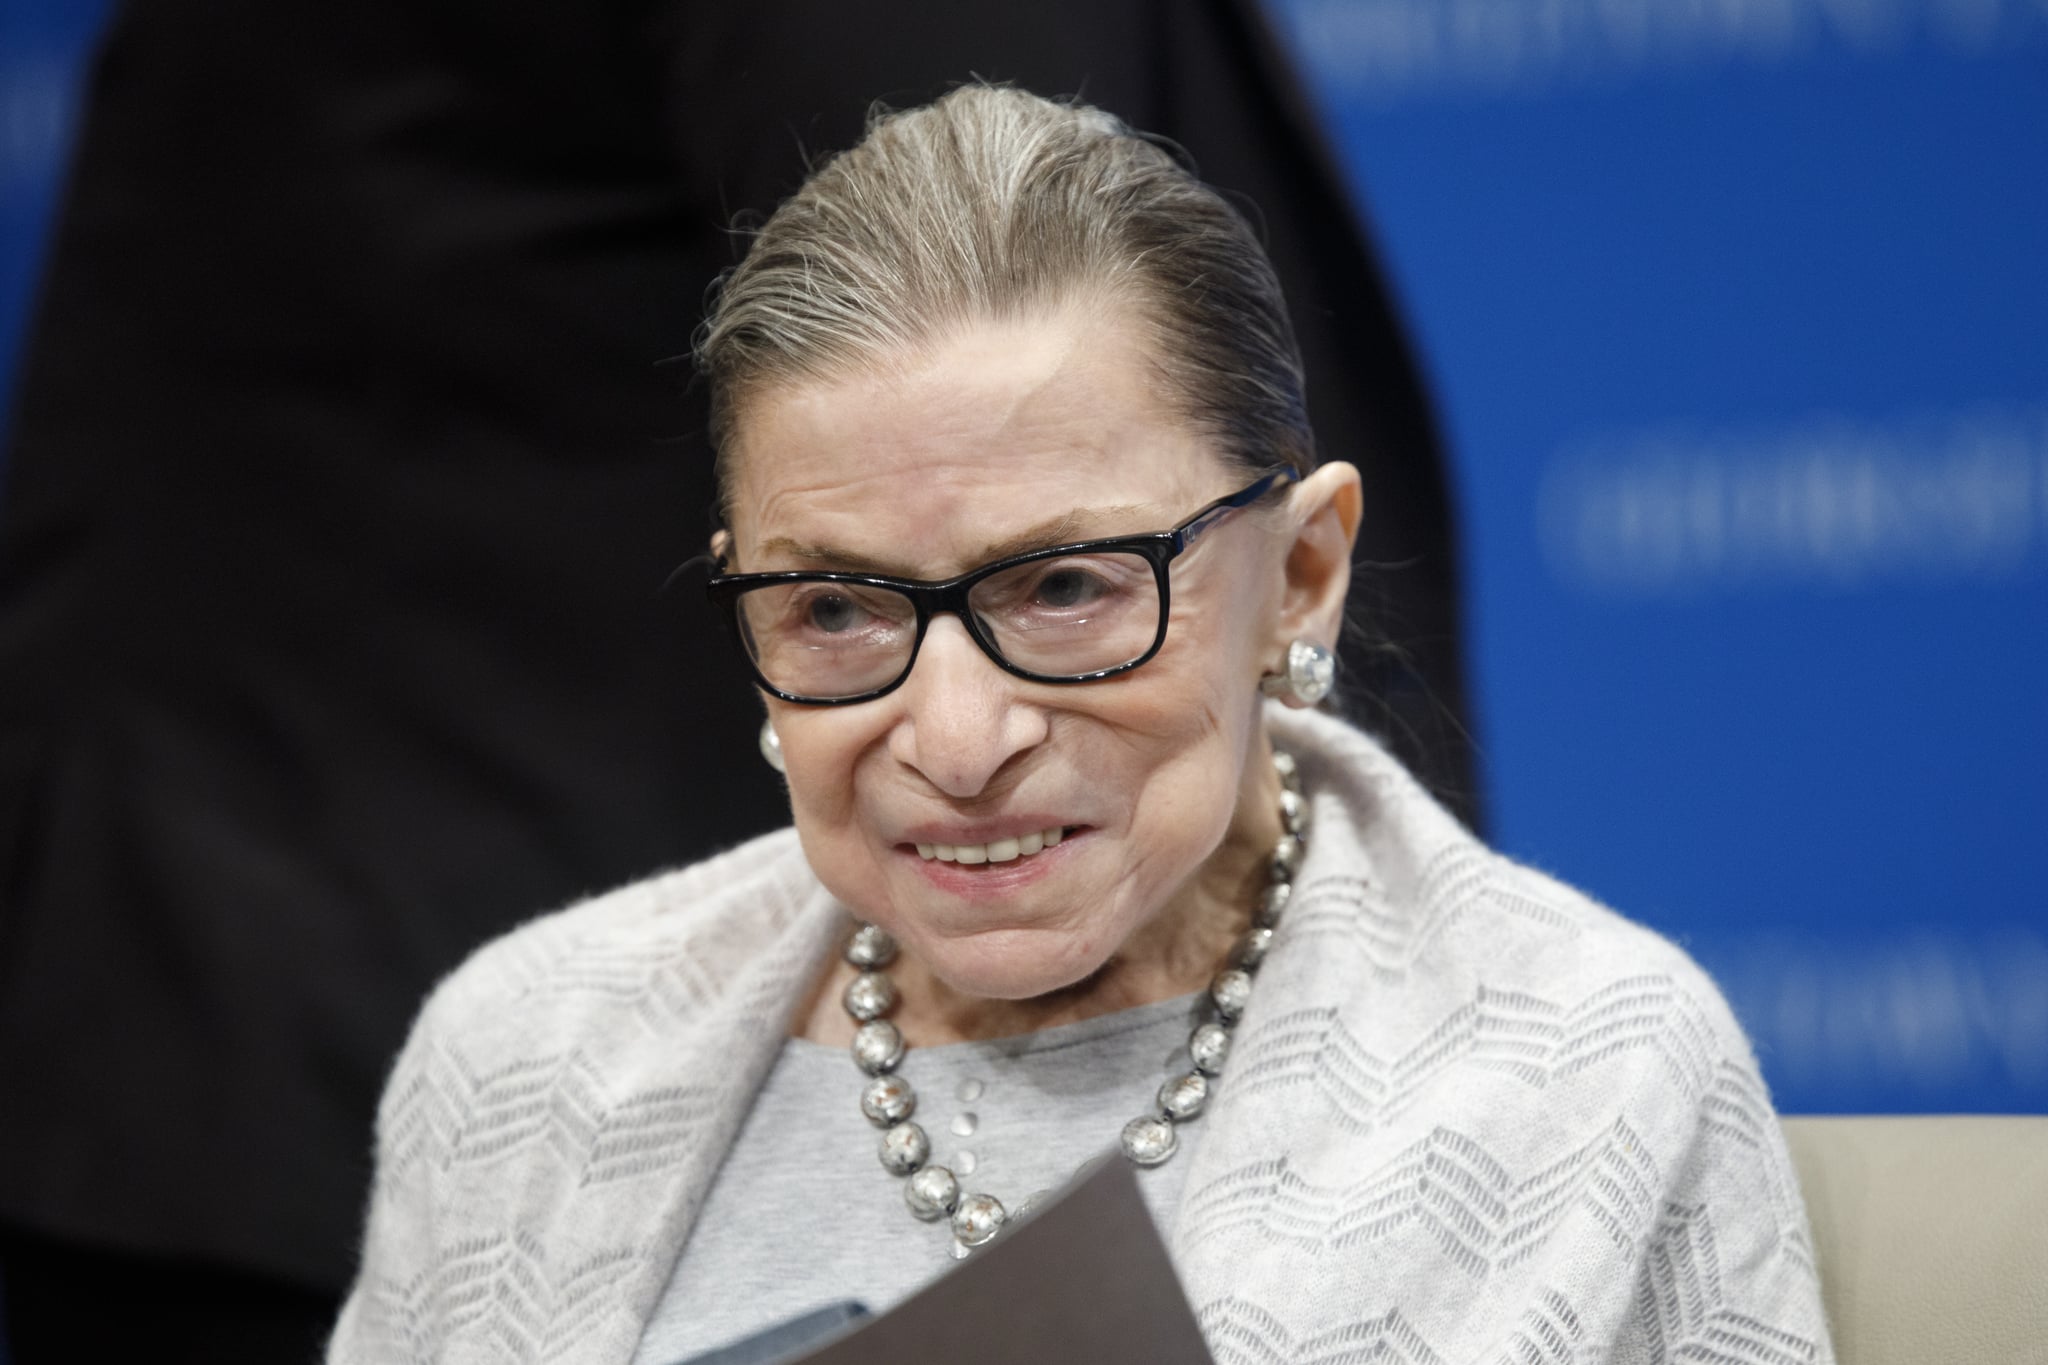 WASHINGTON, DC - SEPTEMBER 12:  Supreme Court Justice Ruth Bader Ginsburg delivers remarks at the Georgetown Law Centre on September 12, 2019, in Washington, DC.  Justice Ginsburg spoke to over 300 attendees about the Supreme Court's previous term. (Photo by Tom Brenner/Getty Images)